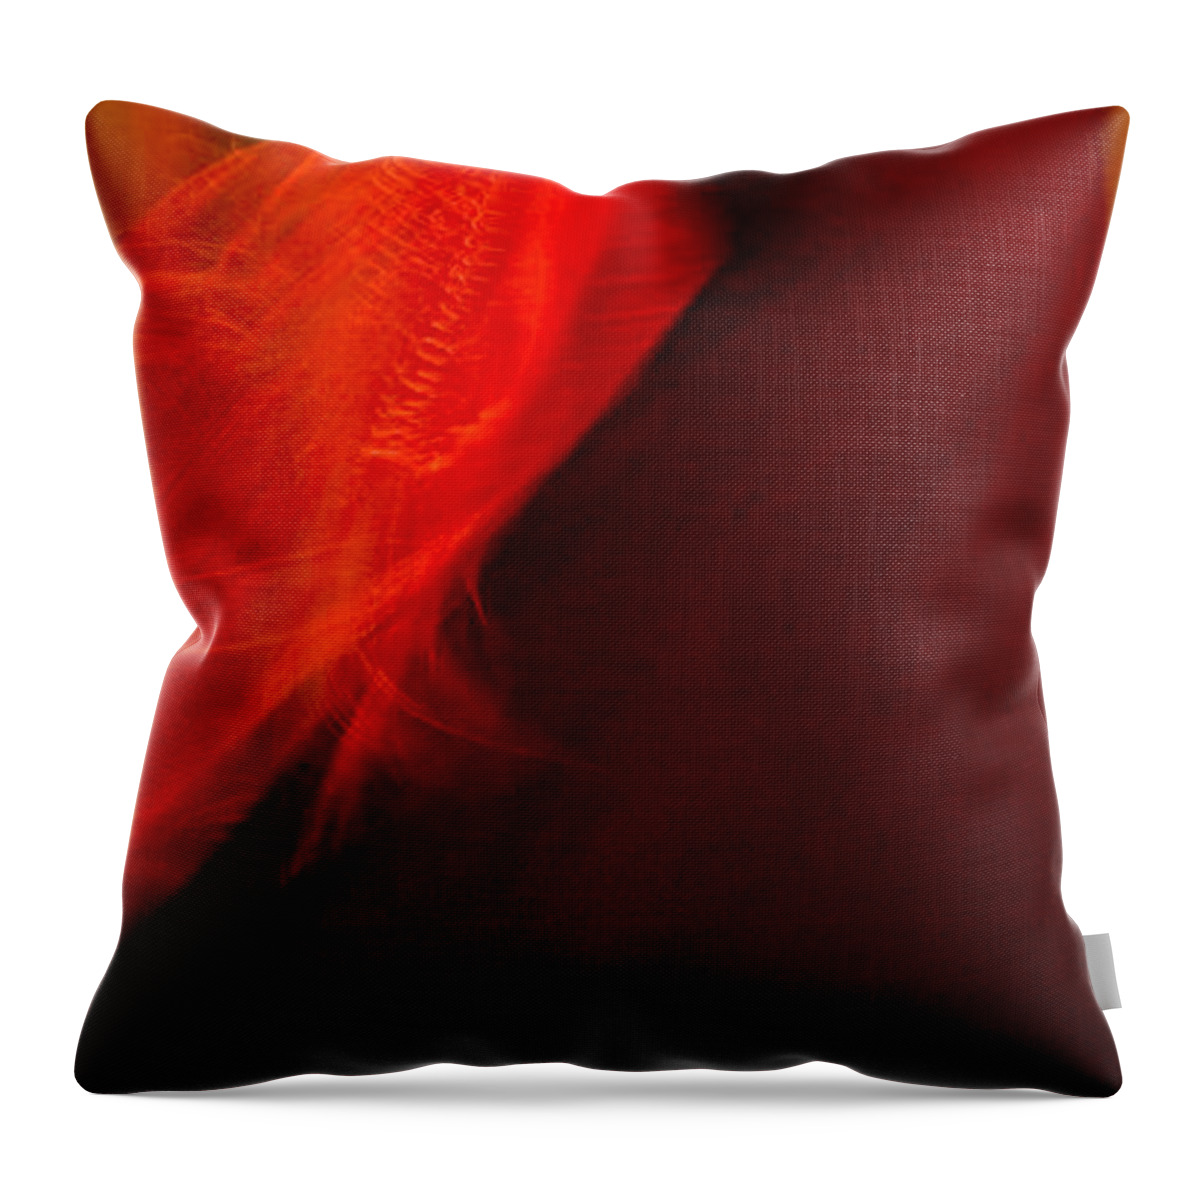 Andalusia Throw Pillow featuring the photograph Flamenco Series 10 by Catherine Sobredo